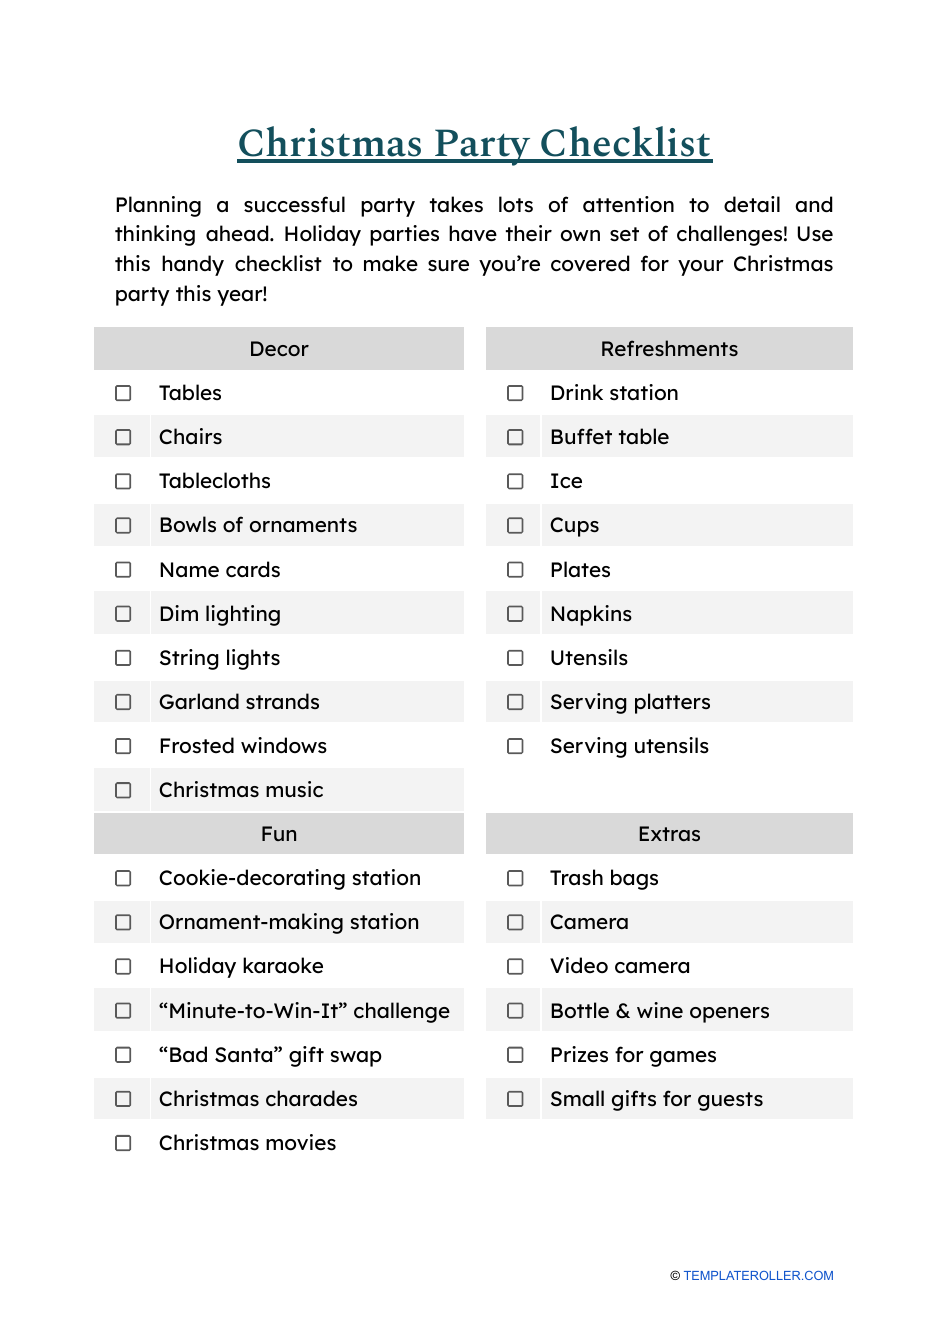 Christmas Party Checklist Template - Preview Image